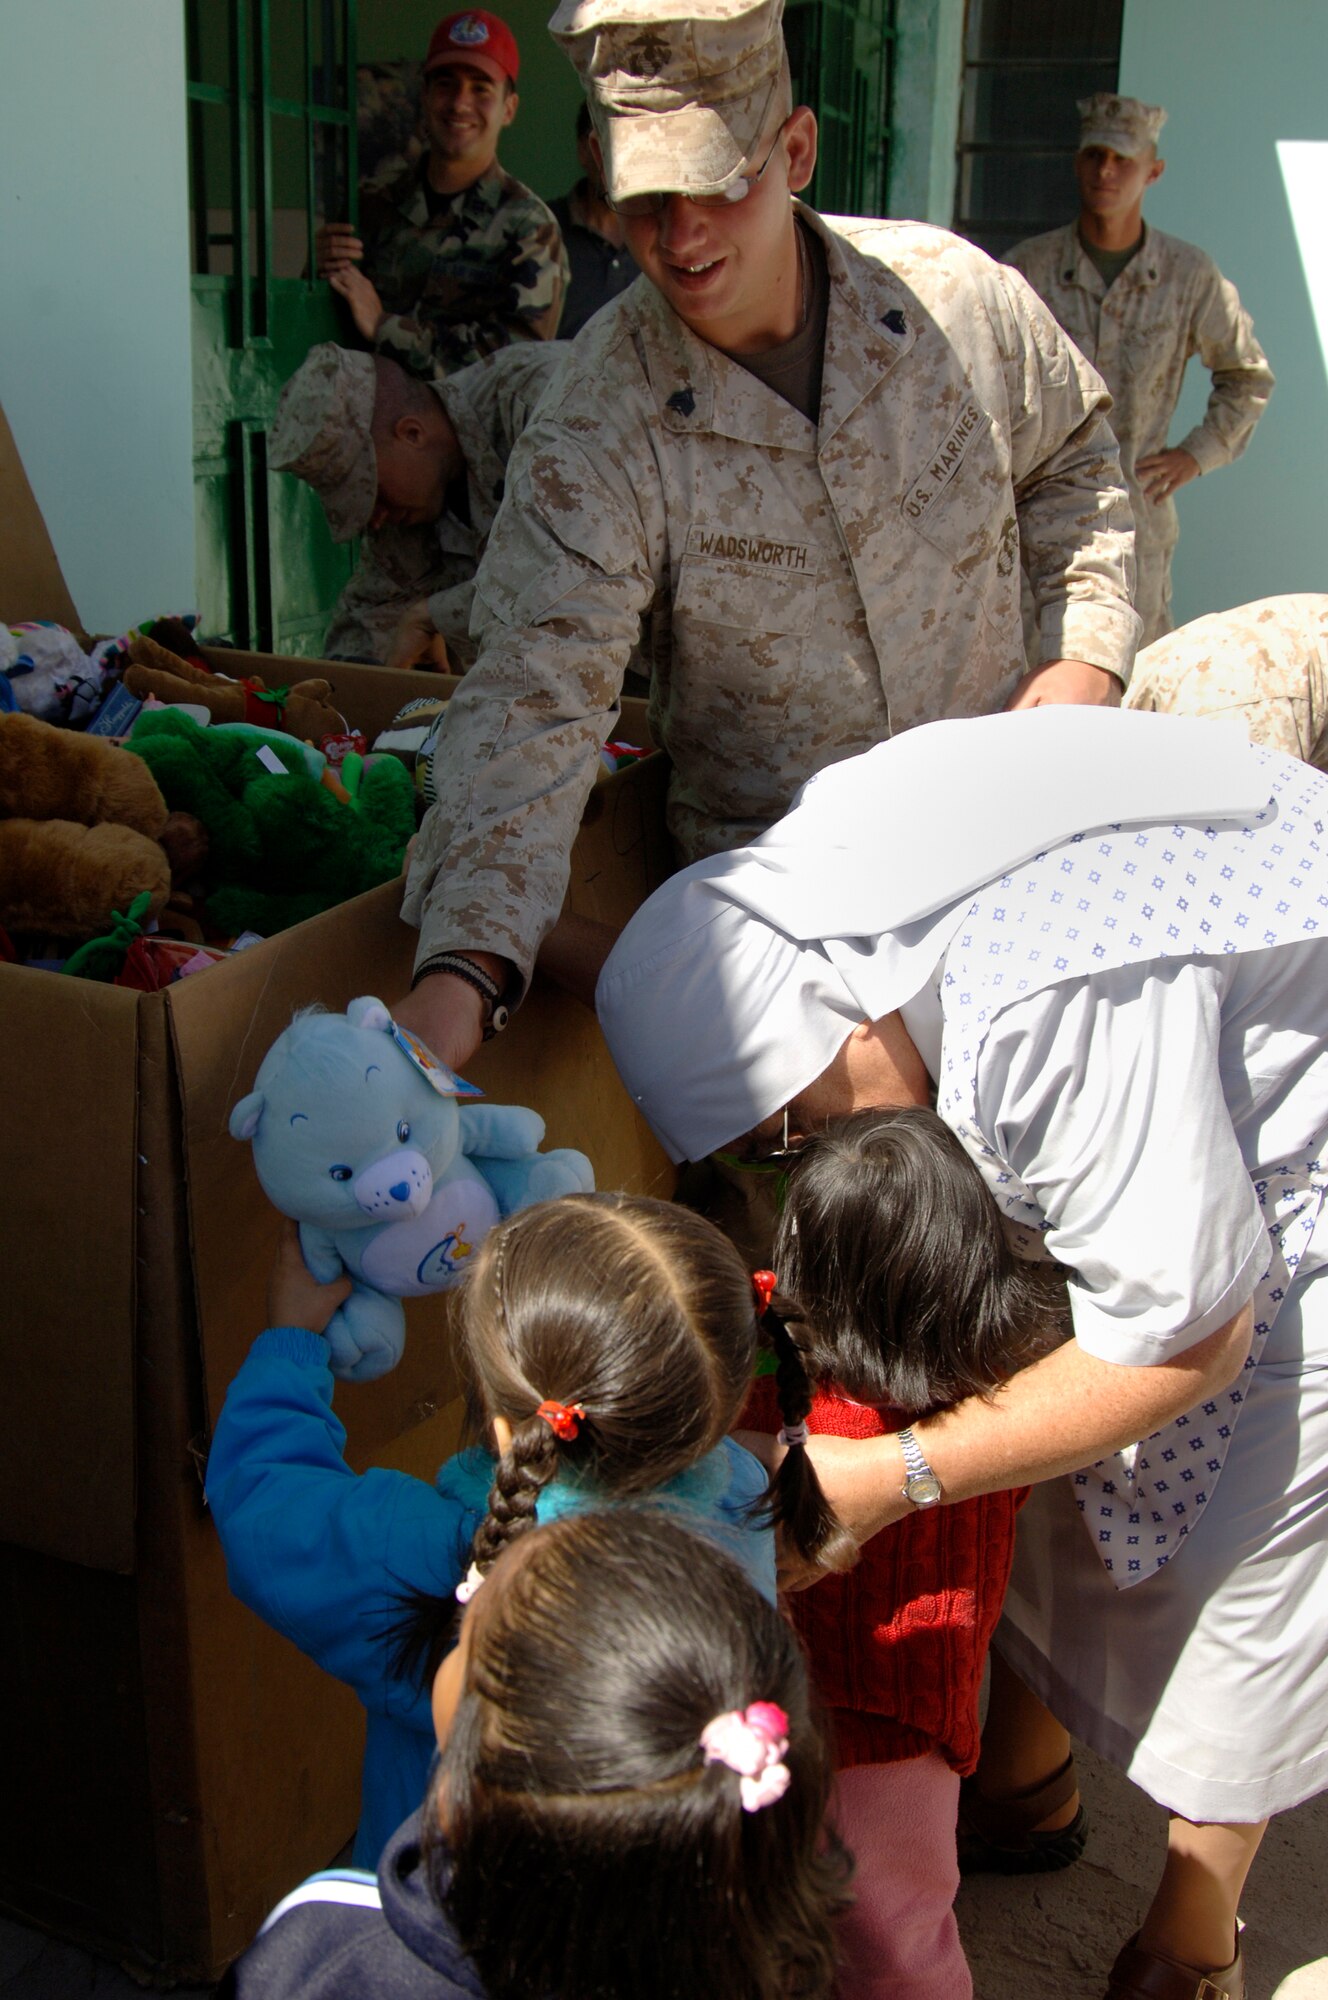 U.S. Marine Sgt. Danial Wadsworth, a vehicle maintainer with Task Force New Horizons, gives a toy to a Peruvian girl at the Juan Andres Vivanco Amorin Orphanage in Ayacucho, Peru, Aug. 14.  Task froce members visited the orphanage to bring toys collected by the 472nd Marine Wing Support Squadron at Willow Grove, Pa., and to spend the morning playing with the children.  More than 950 servicemembers deployed to Ayacucho, Peru to support New Horizons - Peru 2008, a U.S. and Peruvian humanitarian effort to bring quality-of-life construction projects and medical missions to impoverished Peruvians. (U.S. Air Force photo/1st Lt. Mary Pekas)